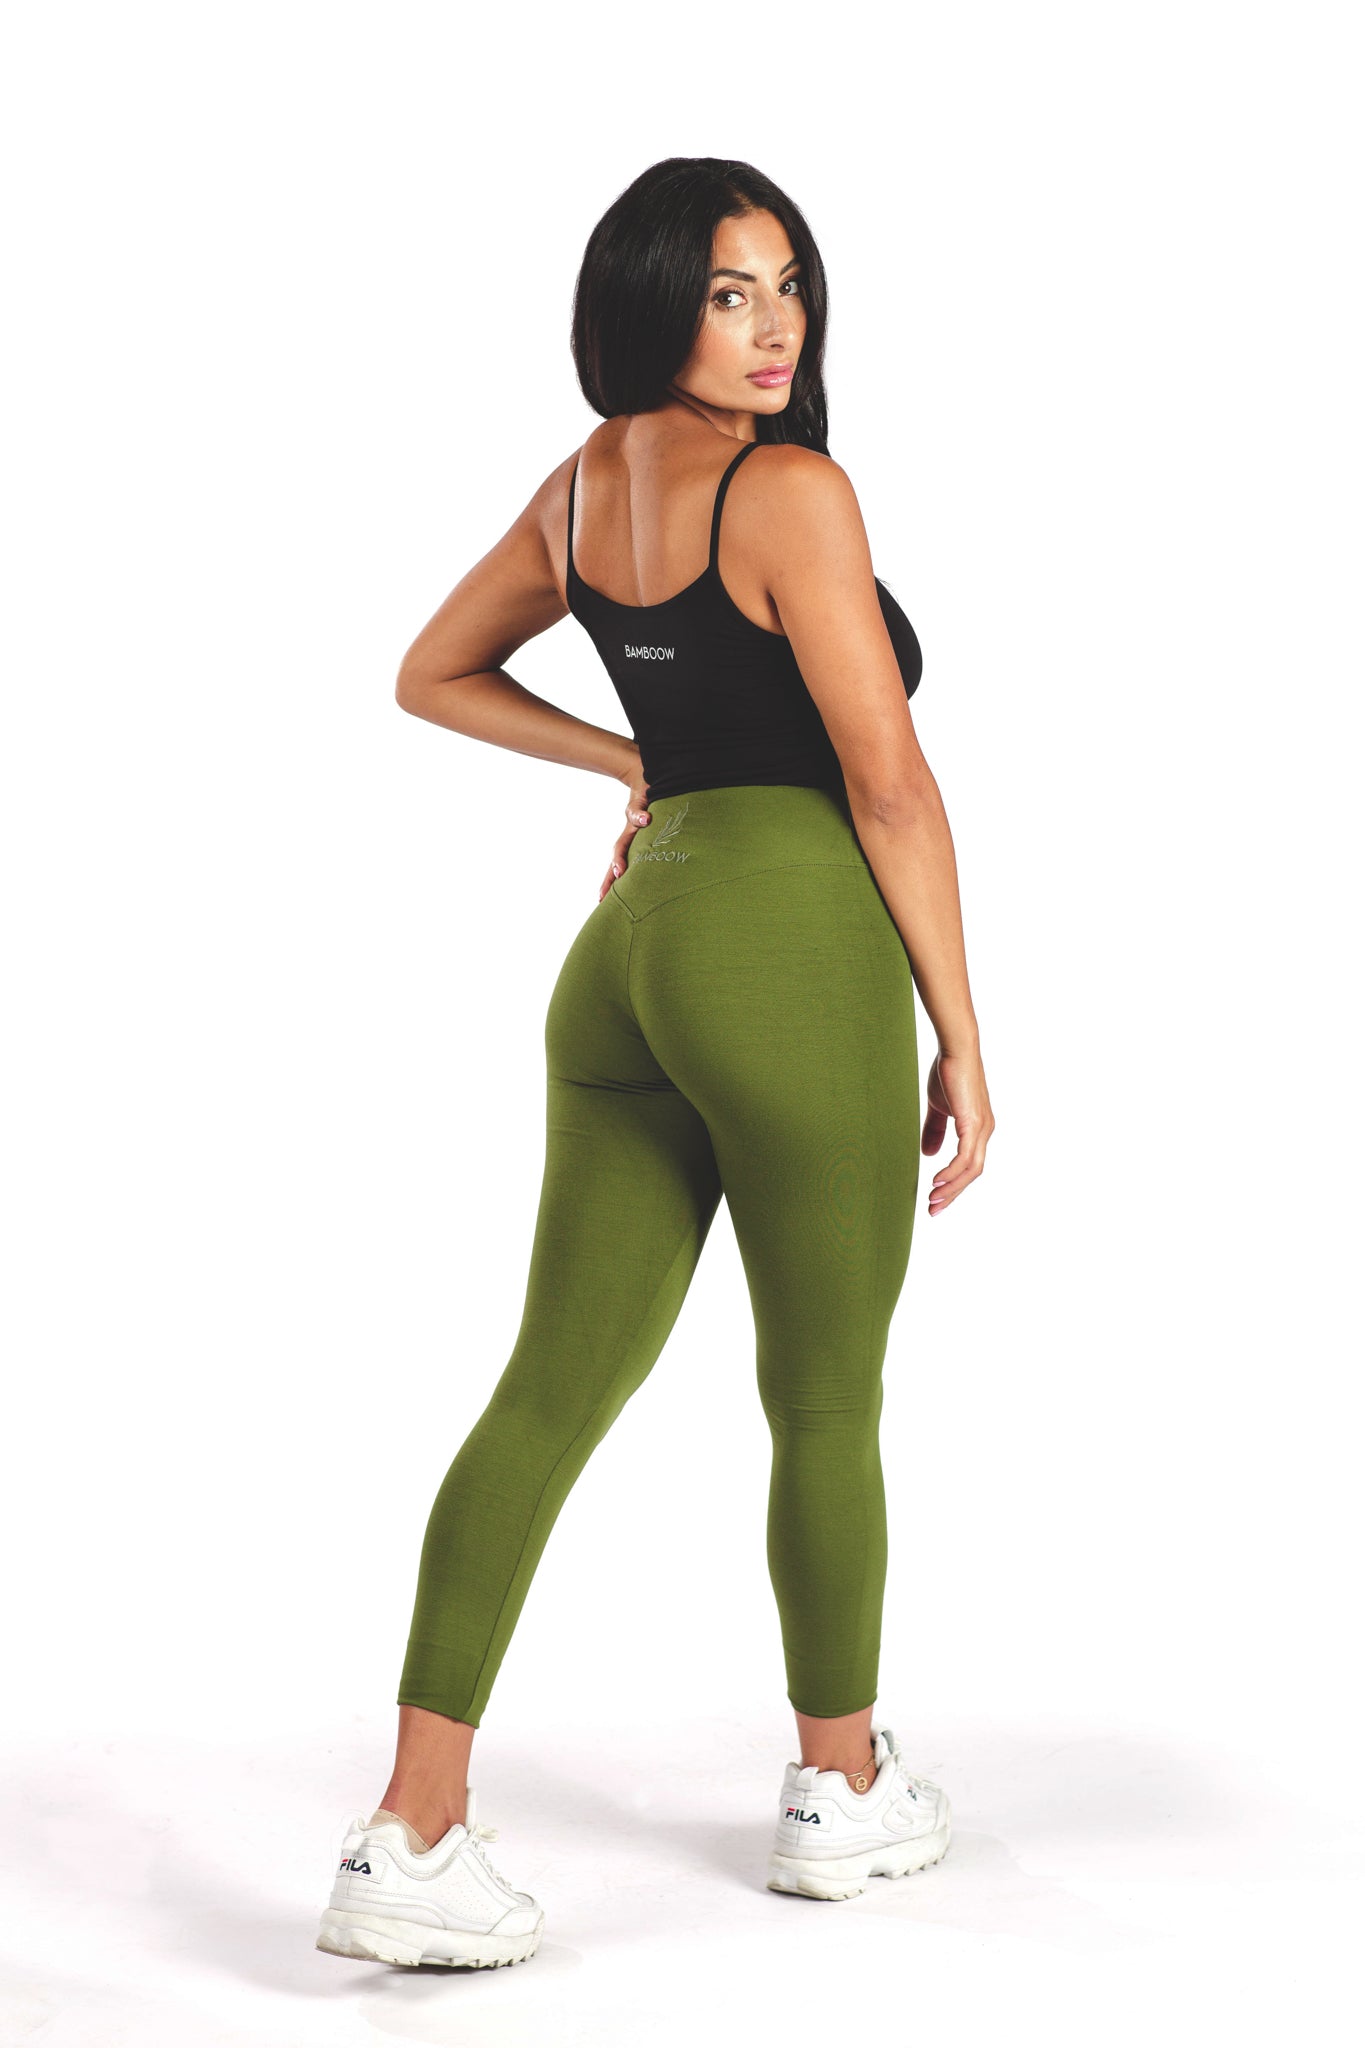 Womens Activewear - Buy Activewear for Women Online at Lowest Price